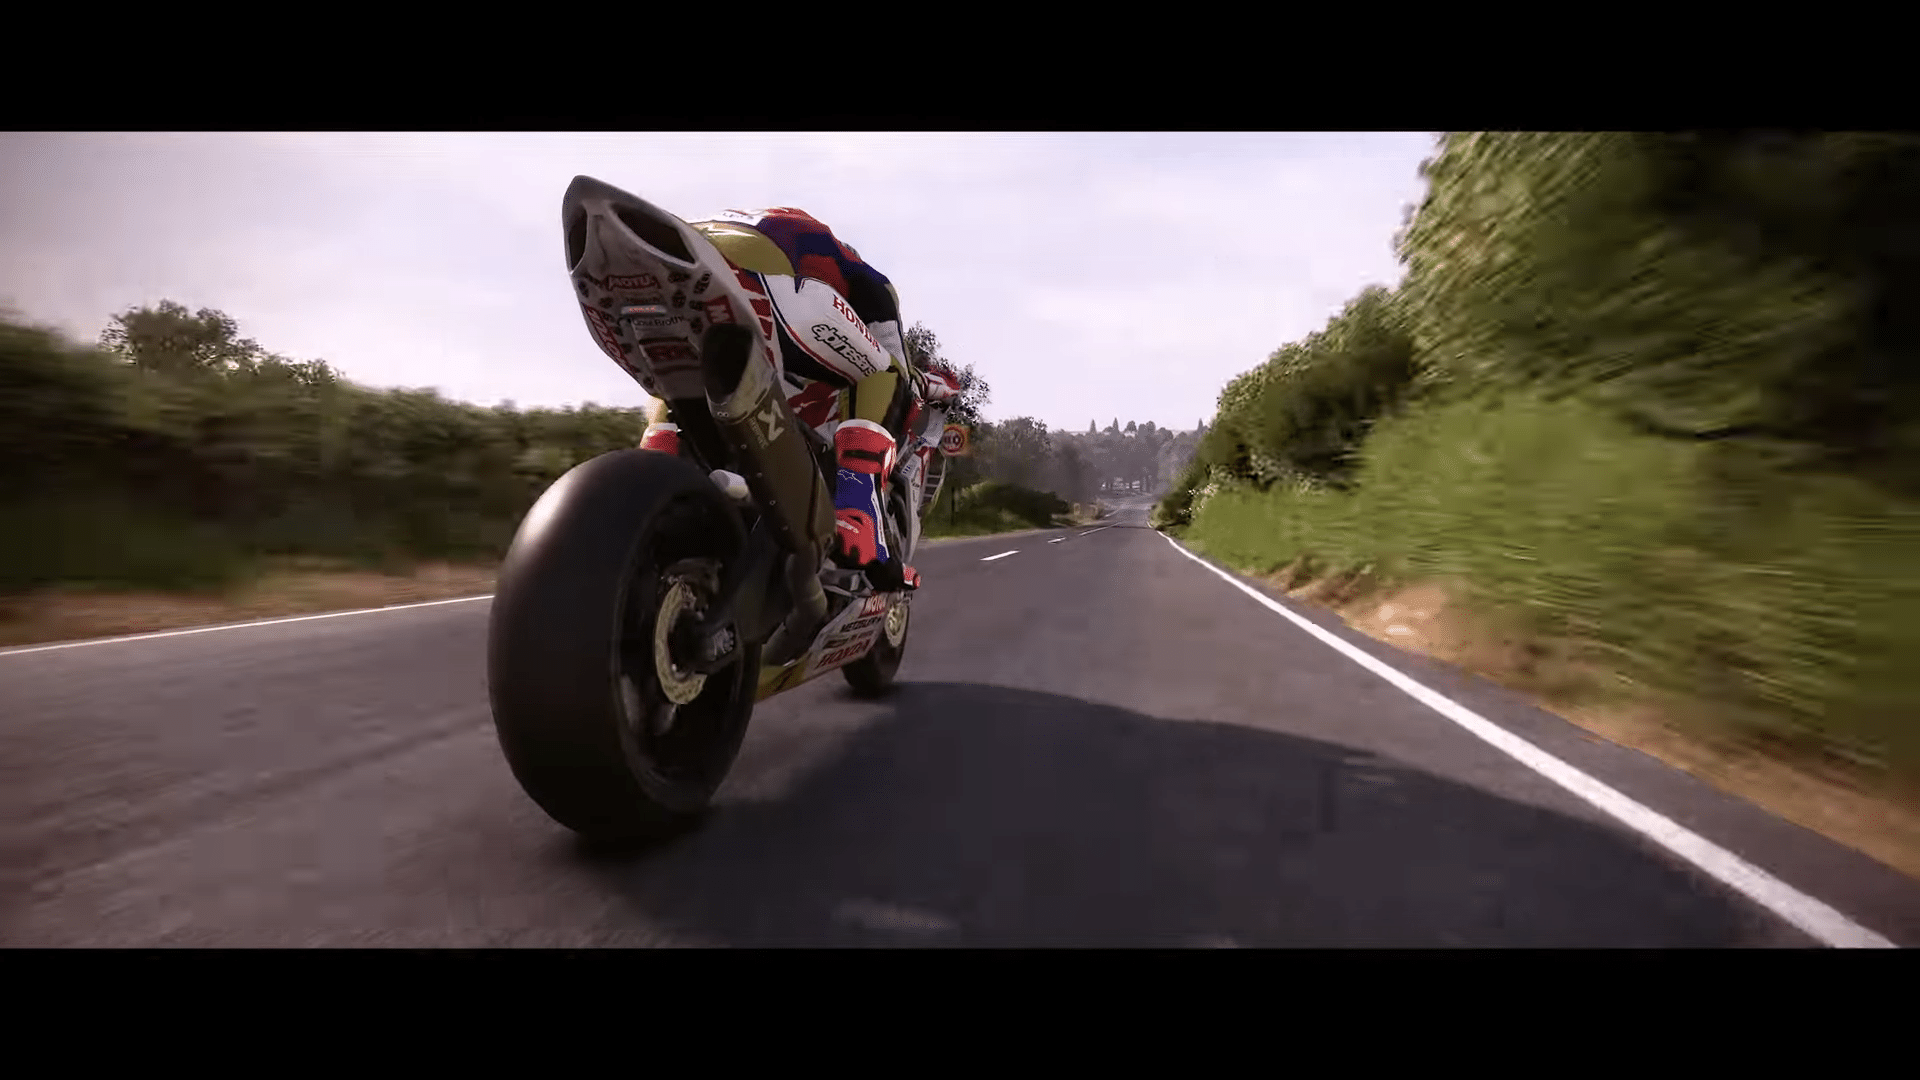 tt isle of man ride on the edge 3 release date